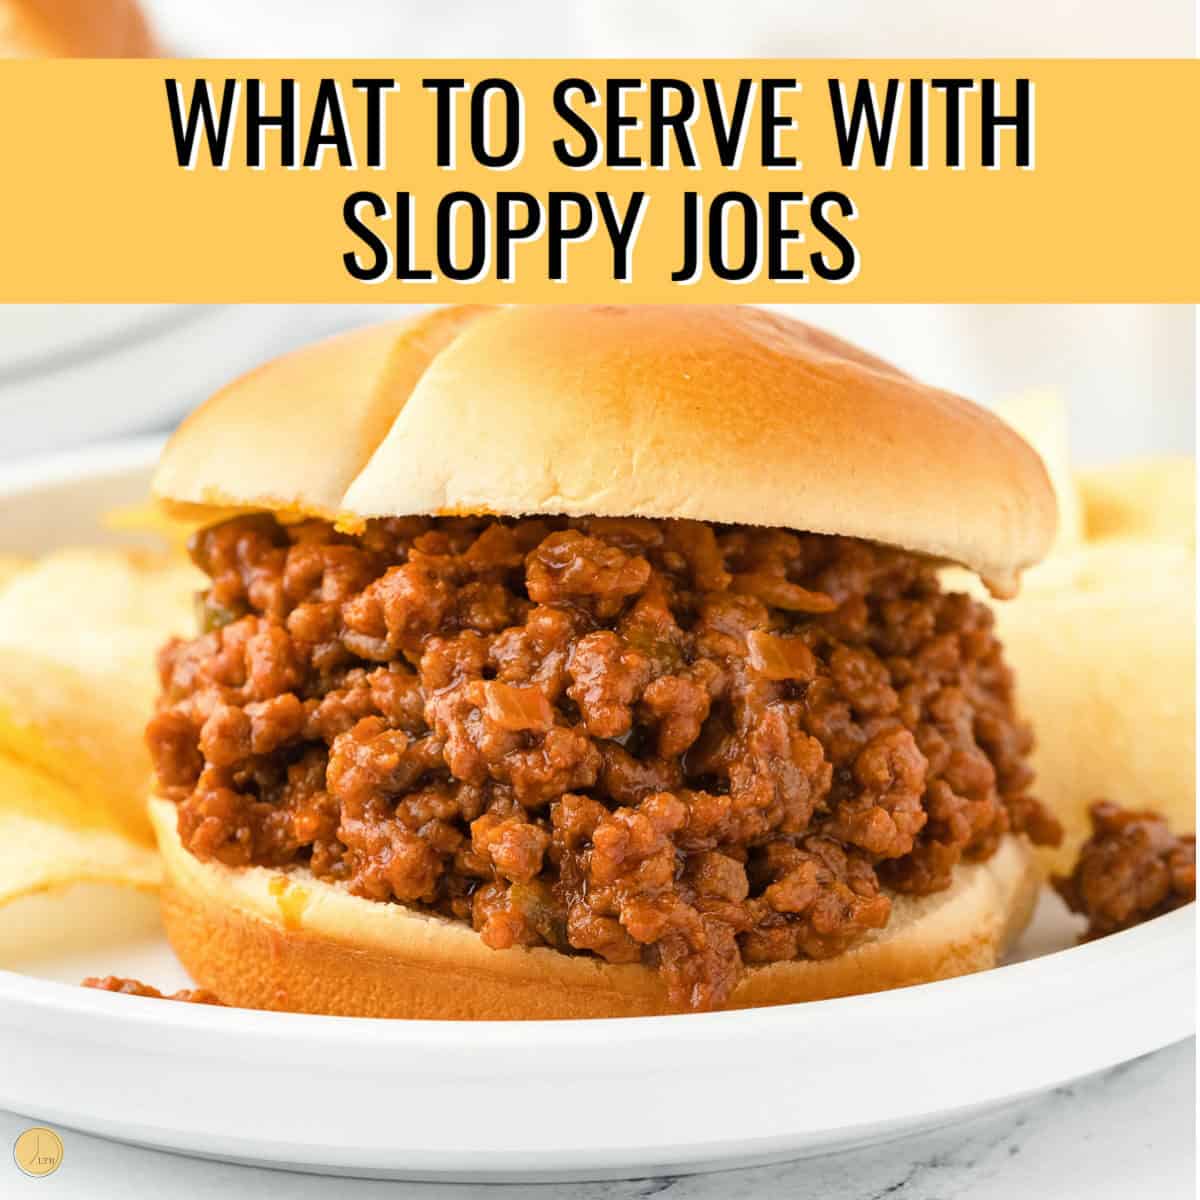 sloppy joe on a plate with yellow banner and text